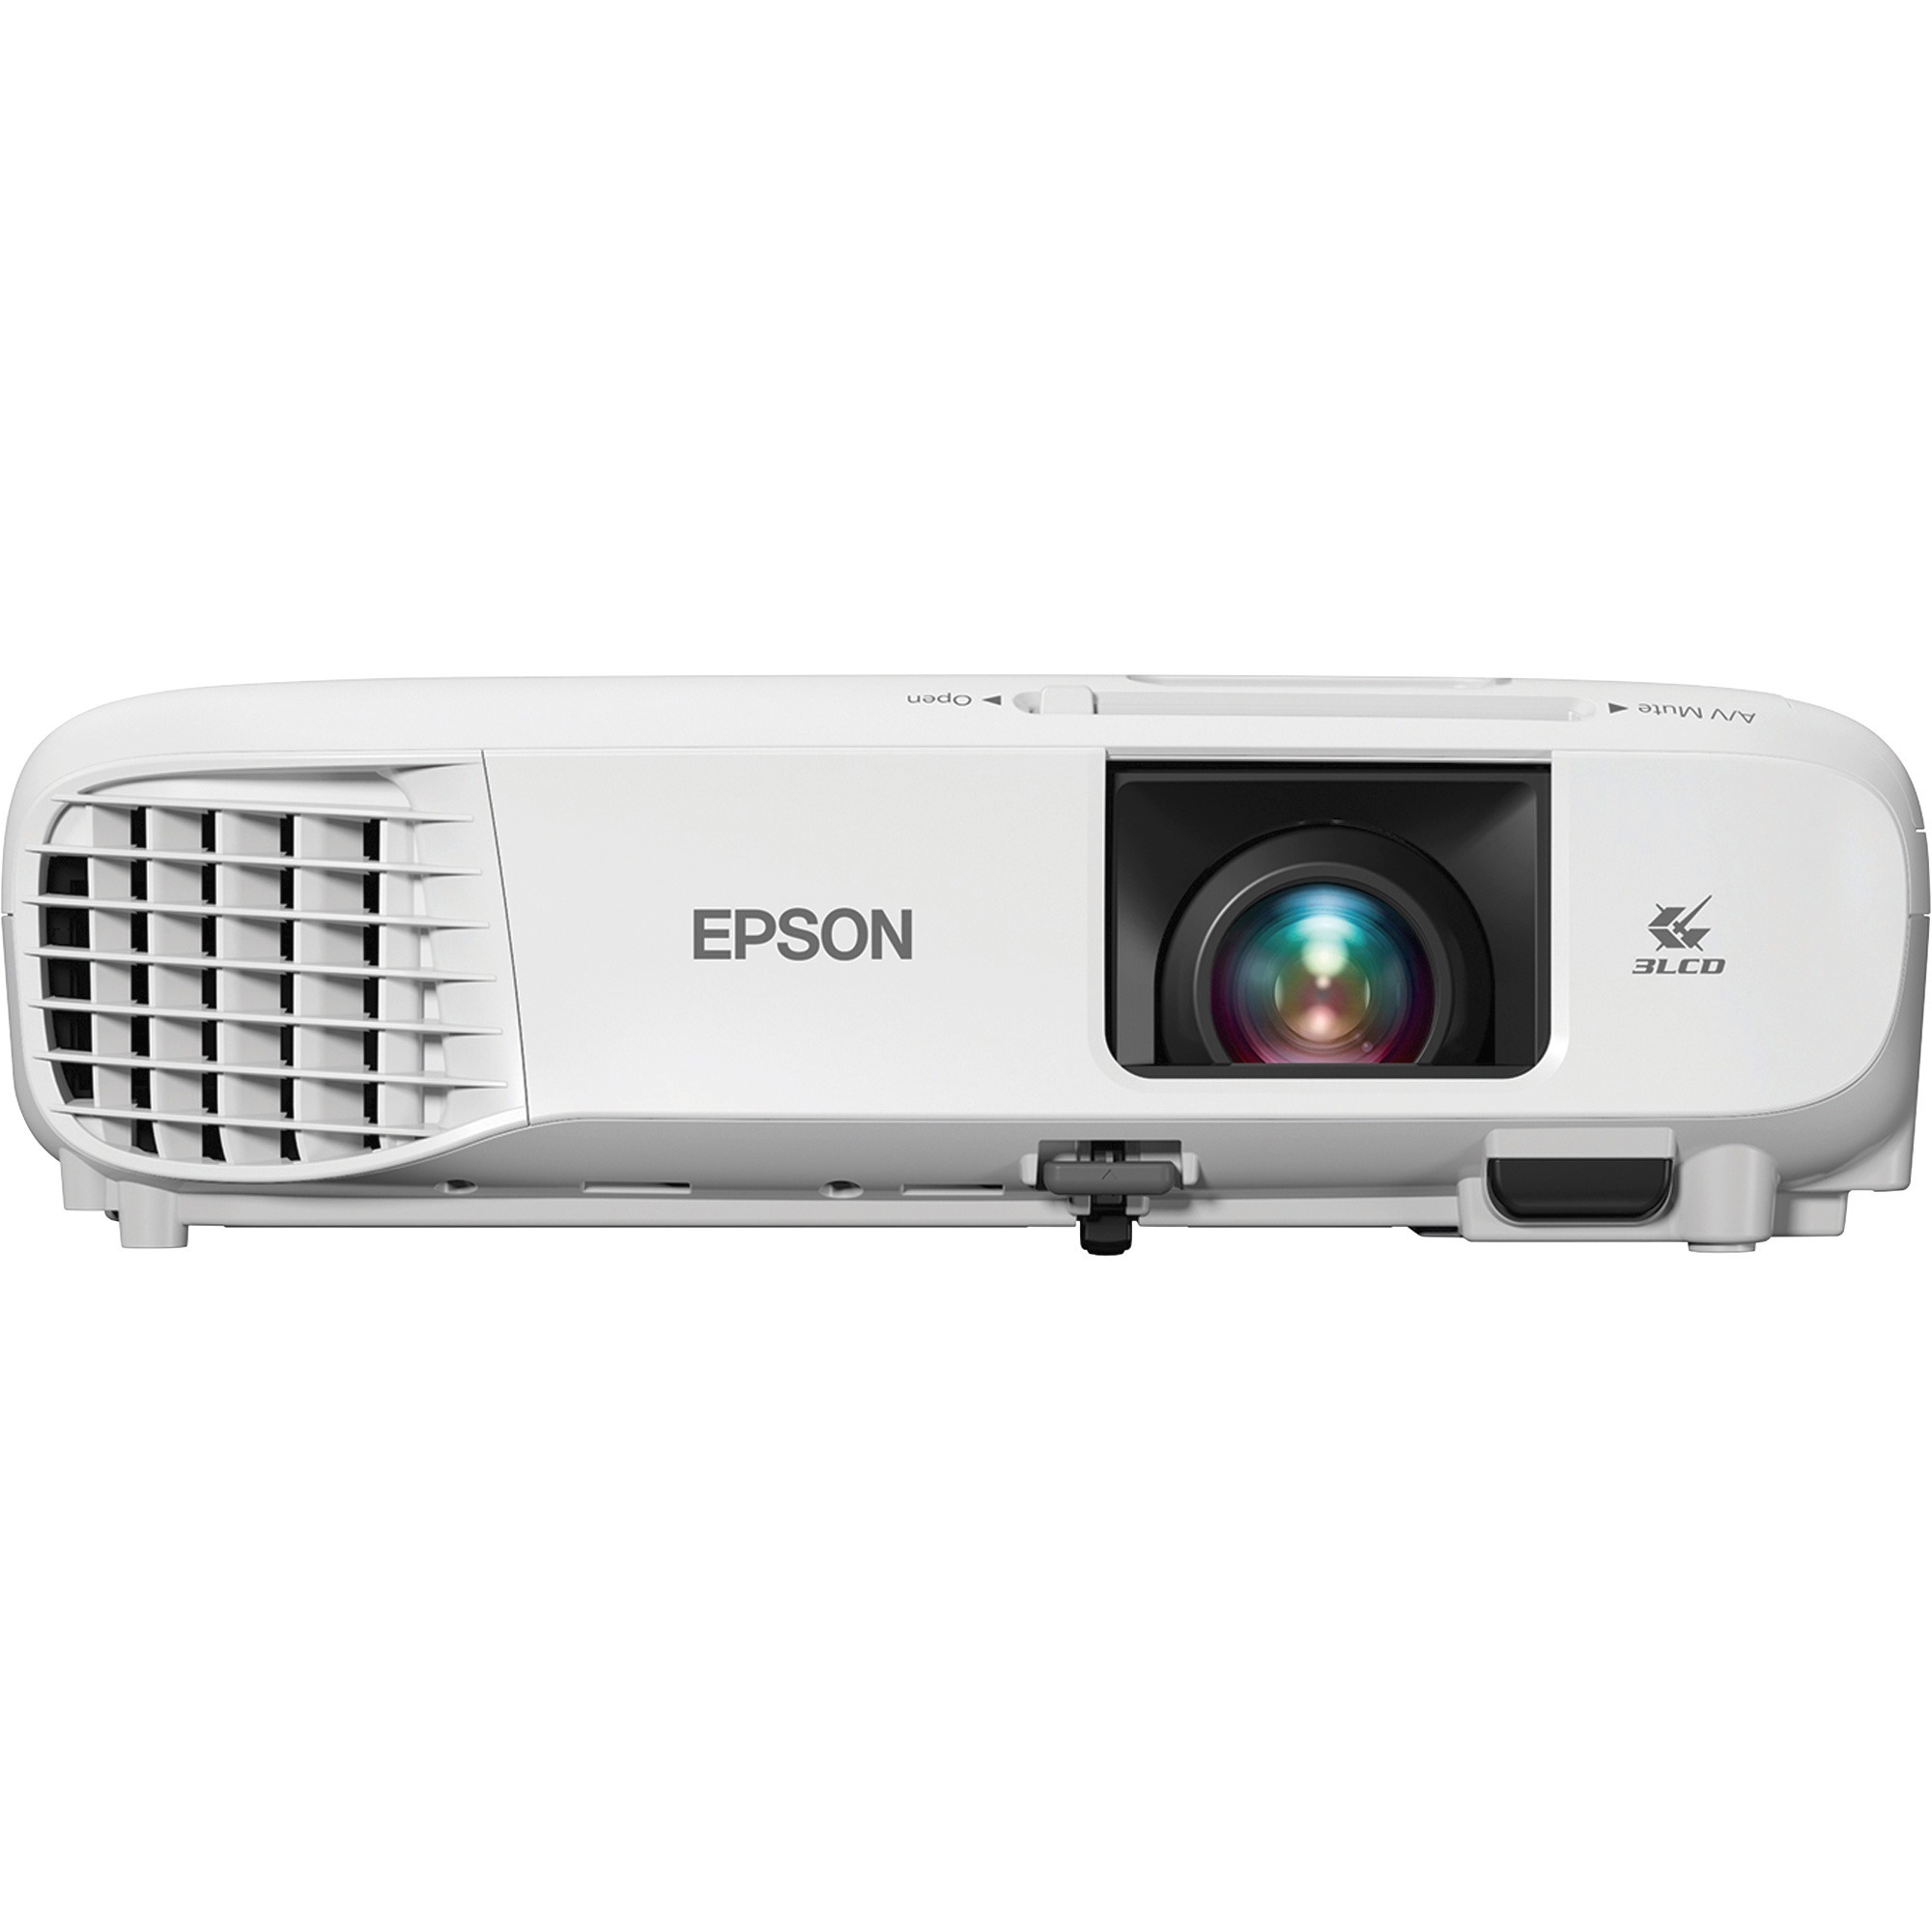 Epson Powerlite W39 Lcd Projector 16 10 1280 X 800 Front Rear Ceiling 6000 Hour Normal Mode 100 Hour Economy Mode Wxga 3500 Lm Hdm Advance Office Janitorial Supplies